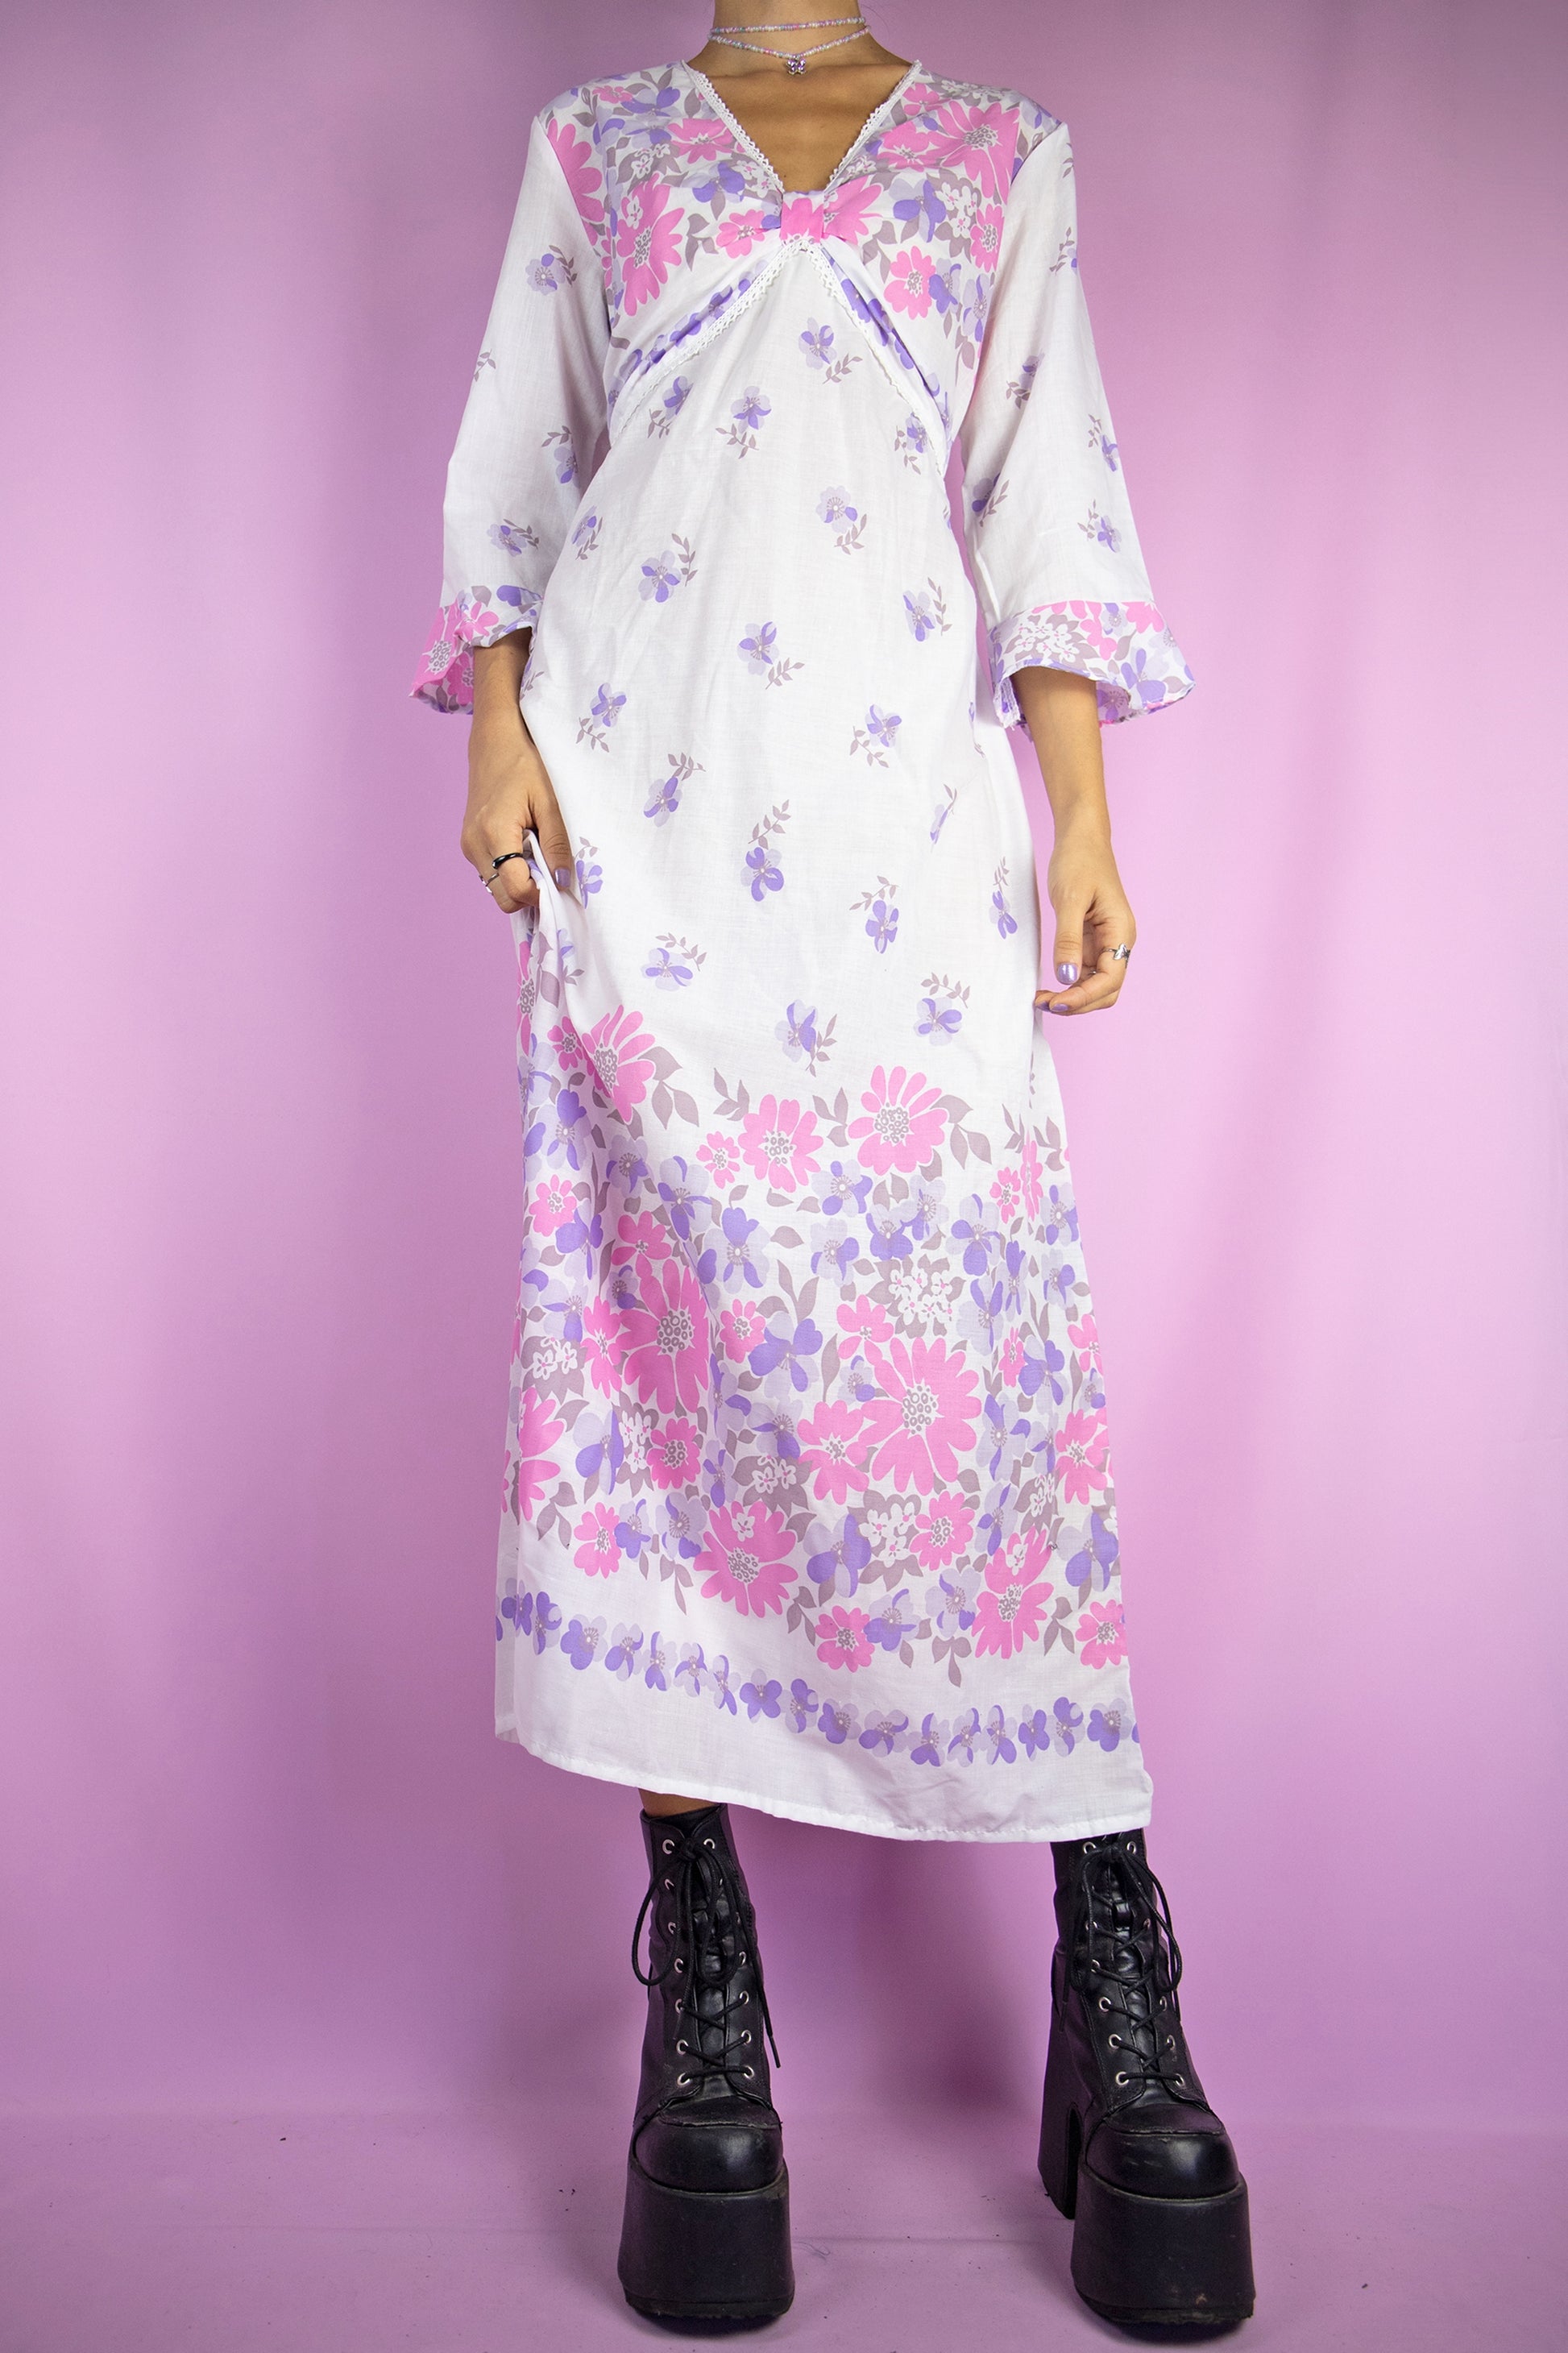 The Vintage 80s Boho White Midi Dress is a summer bell sleeve kaftan maxi dress with a pink and purple floral pattern and a v-neck.